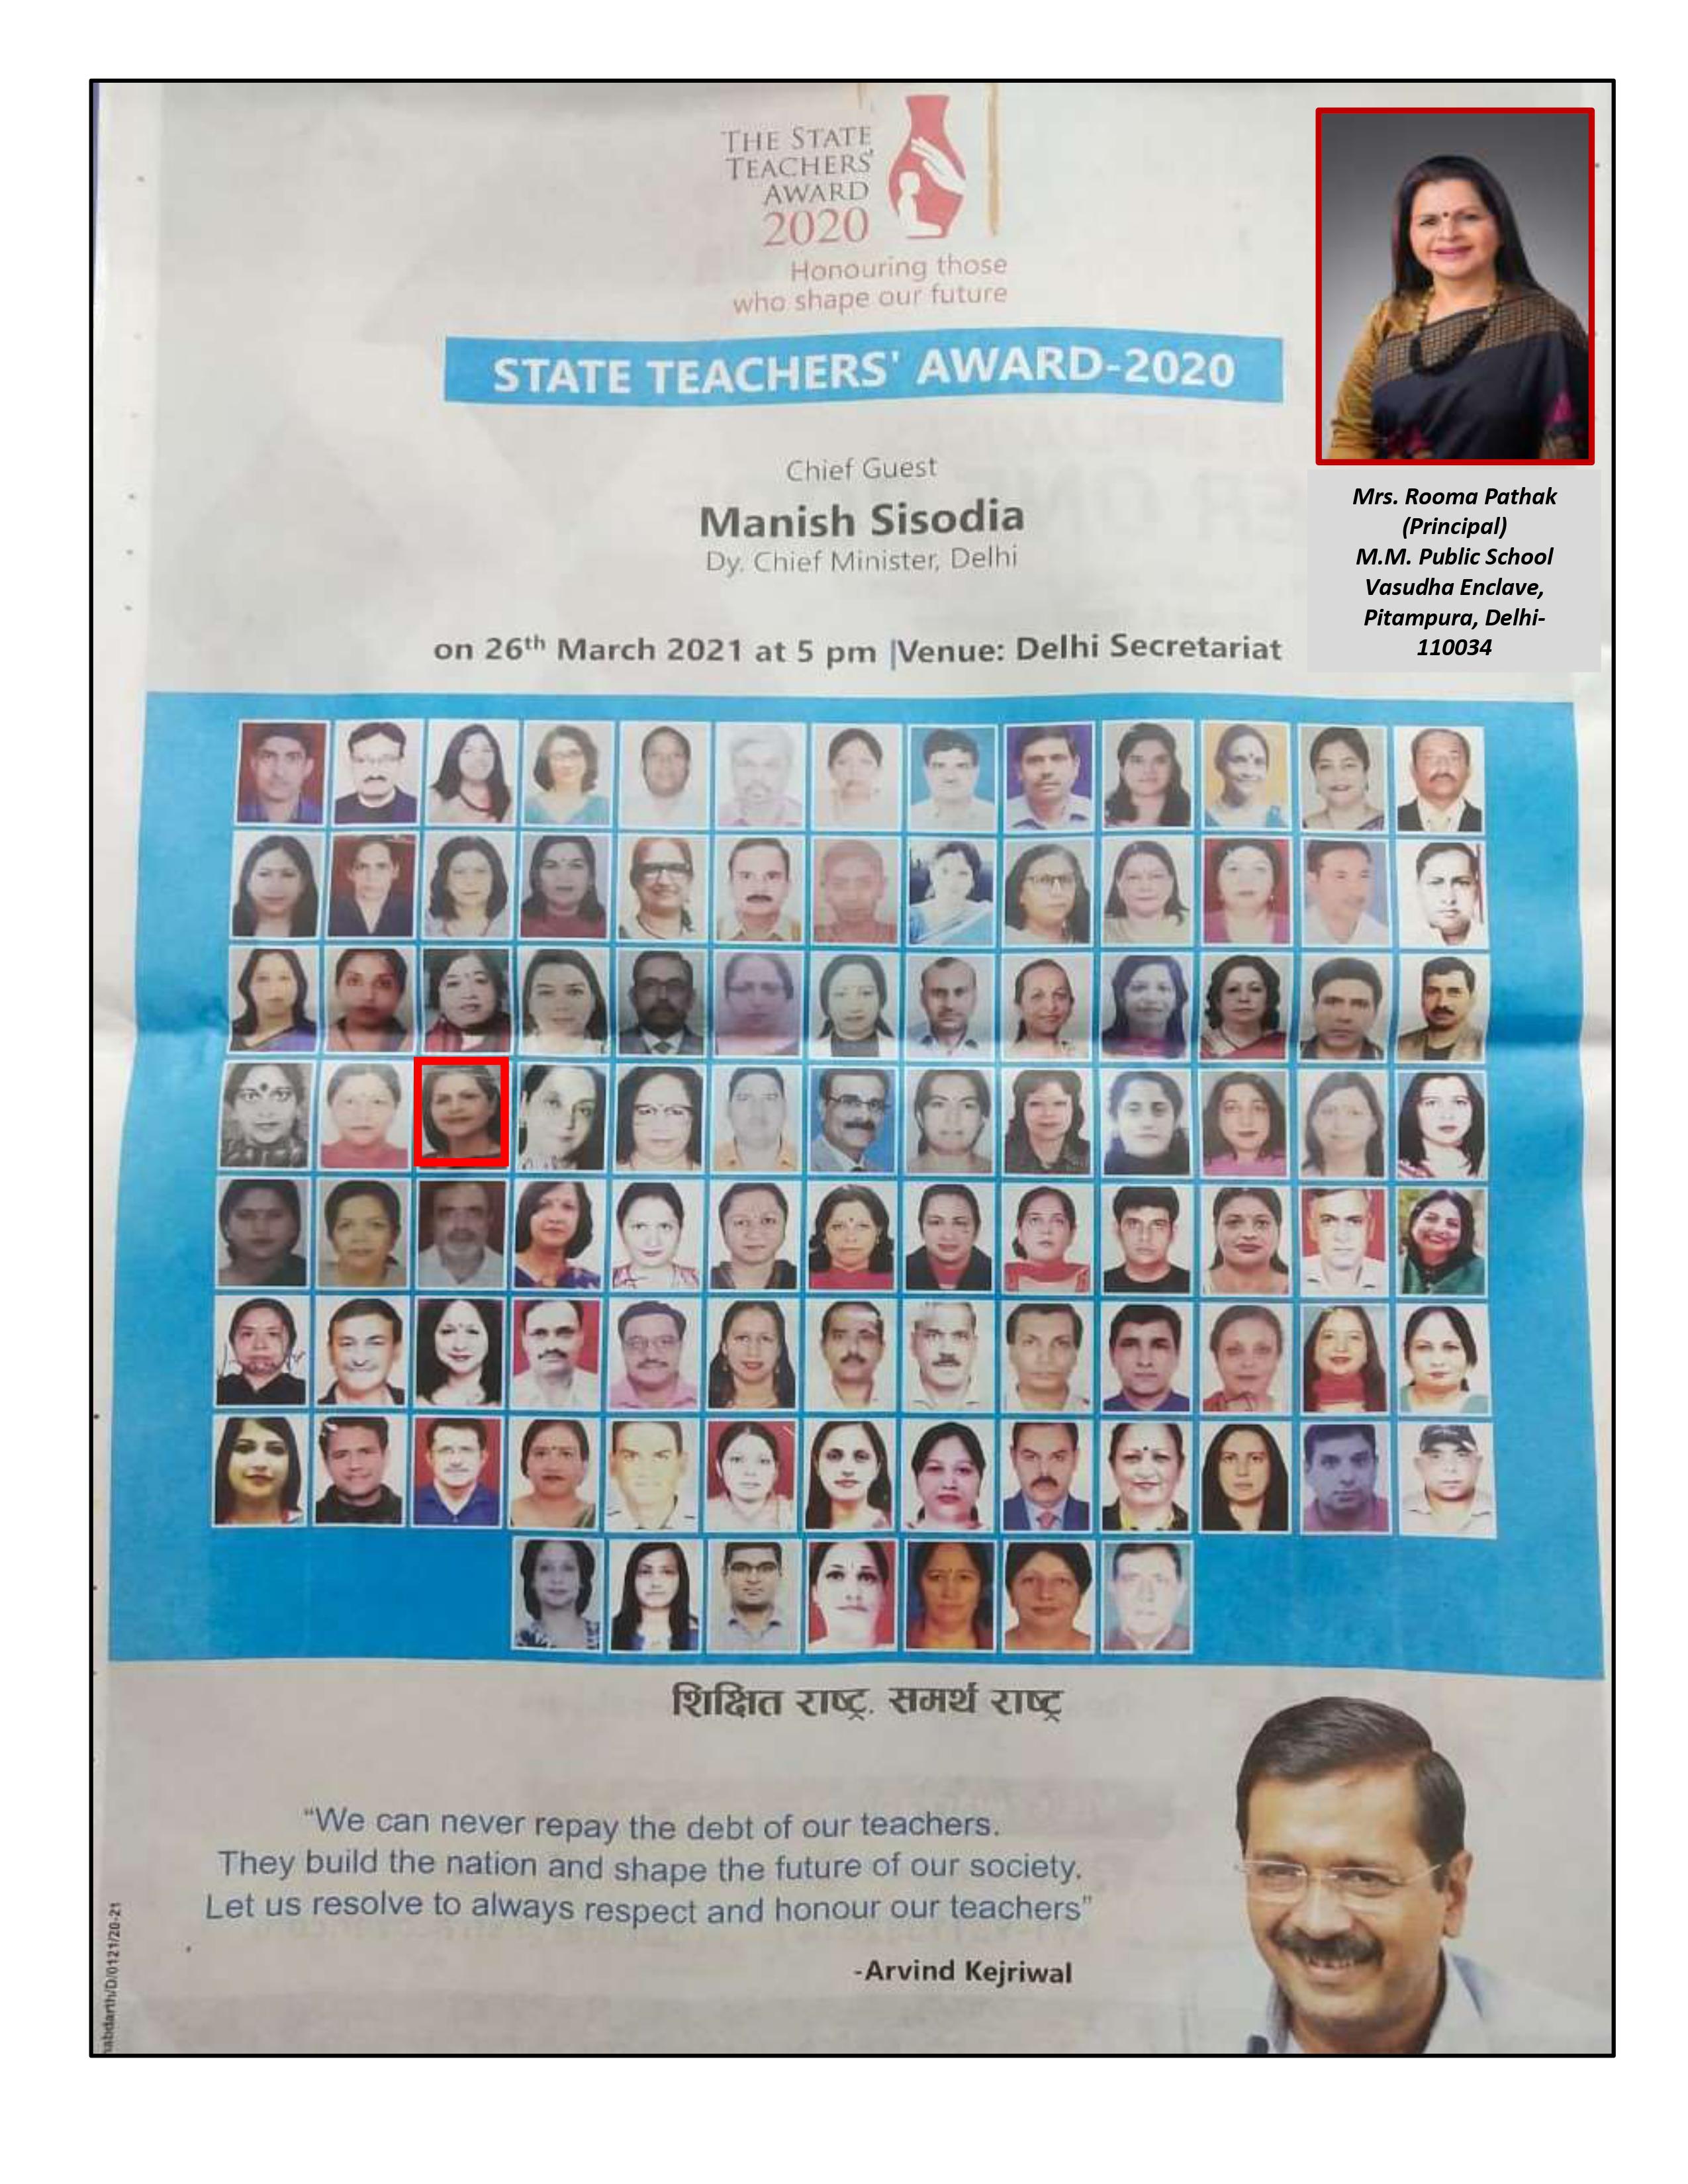 Being Honoured with THE STATE TEACHERS' AWARD 2020